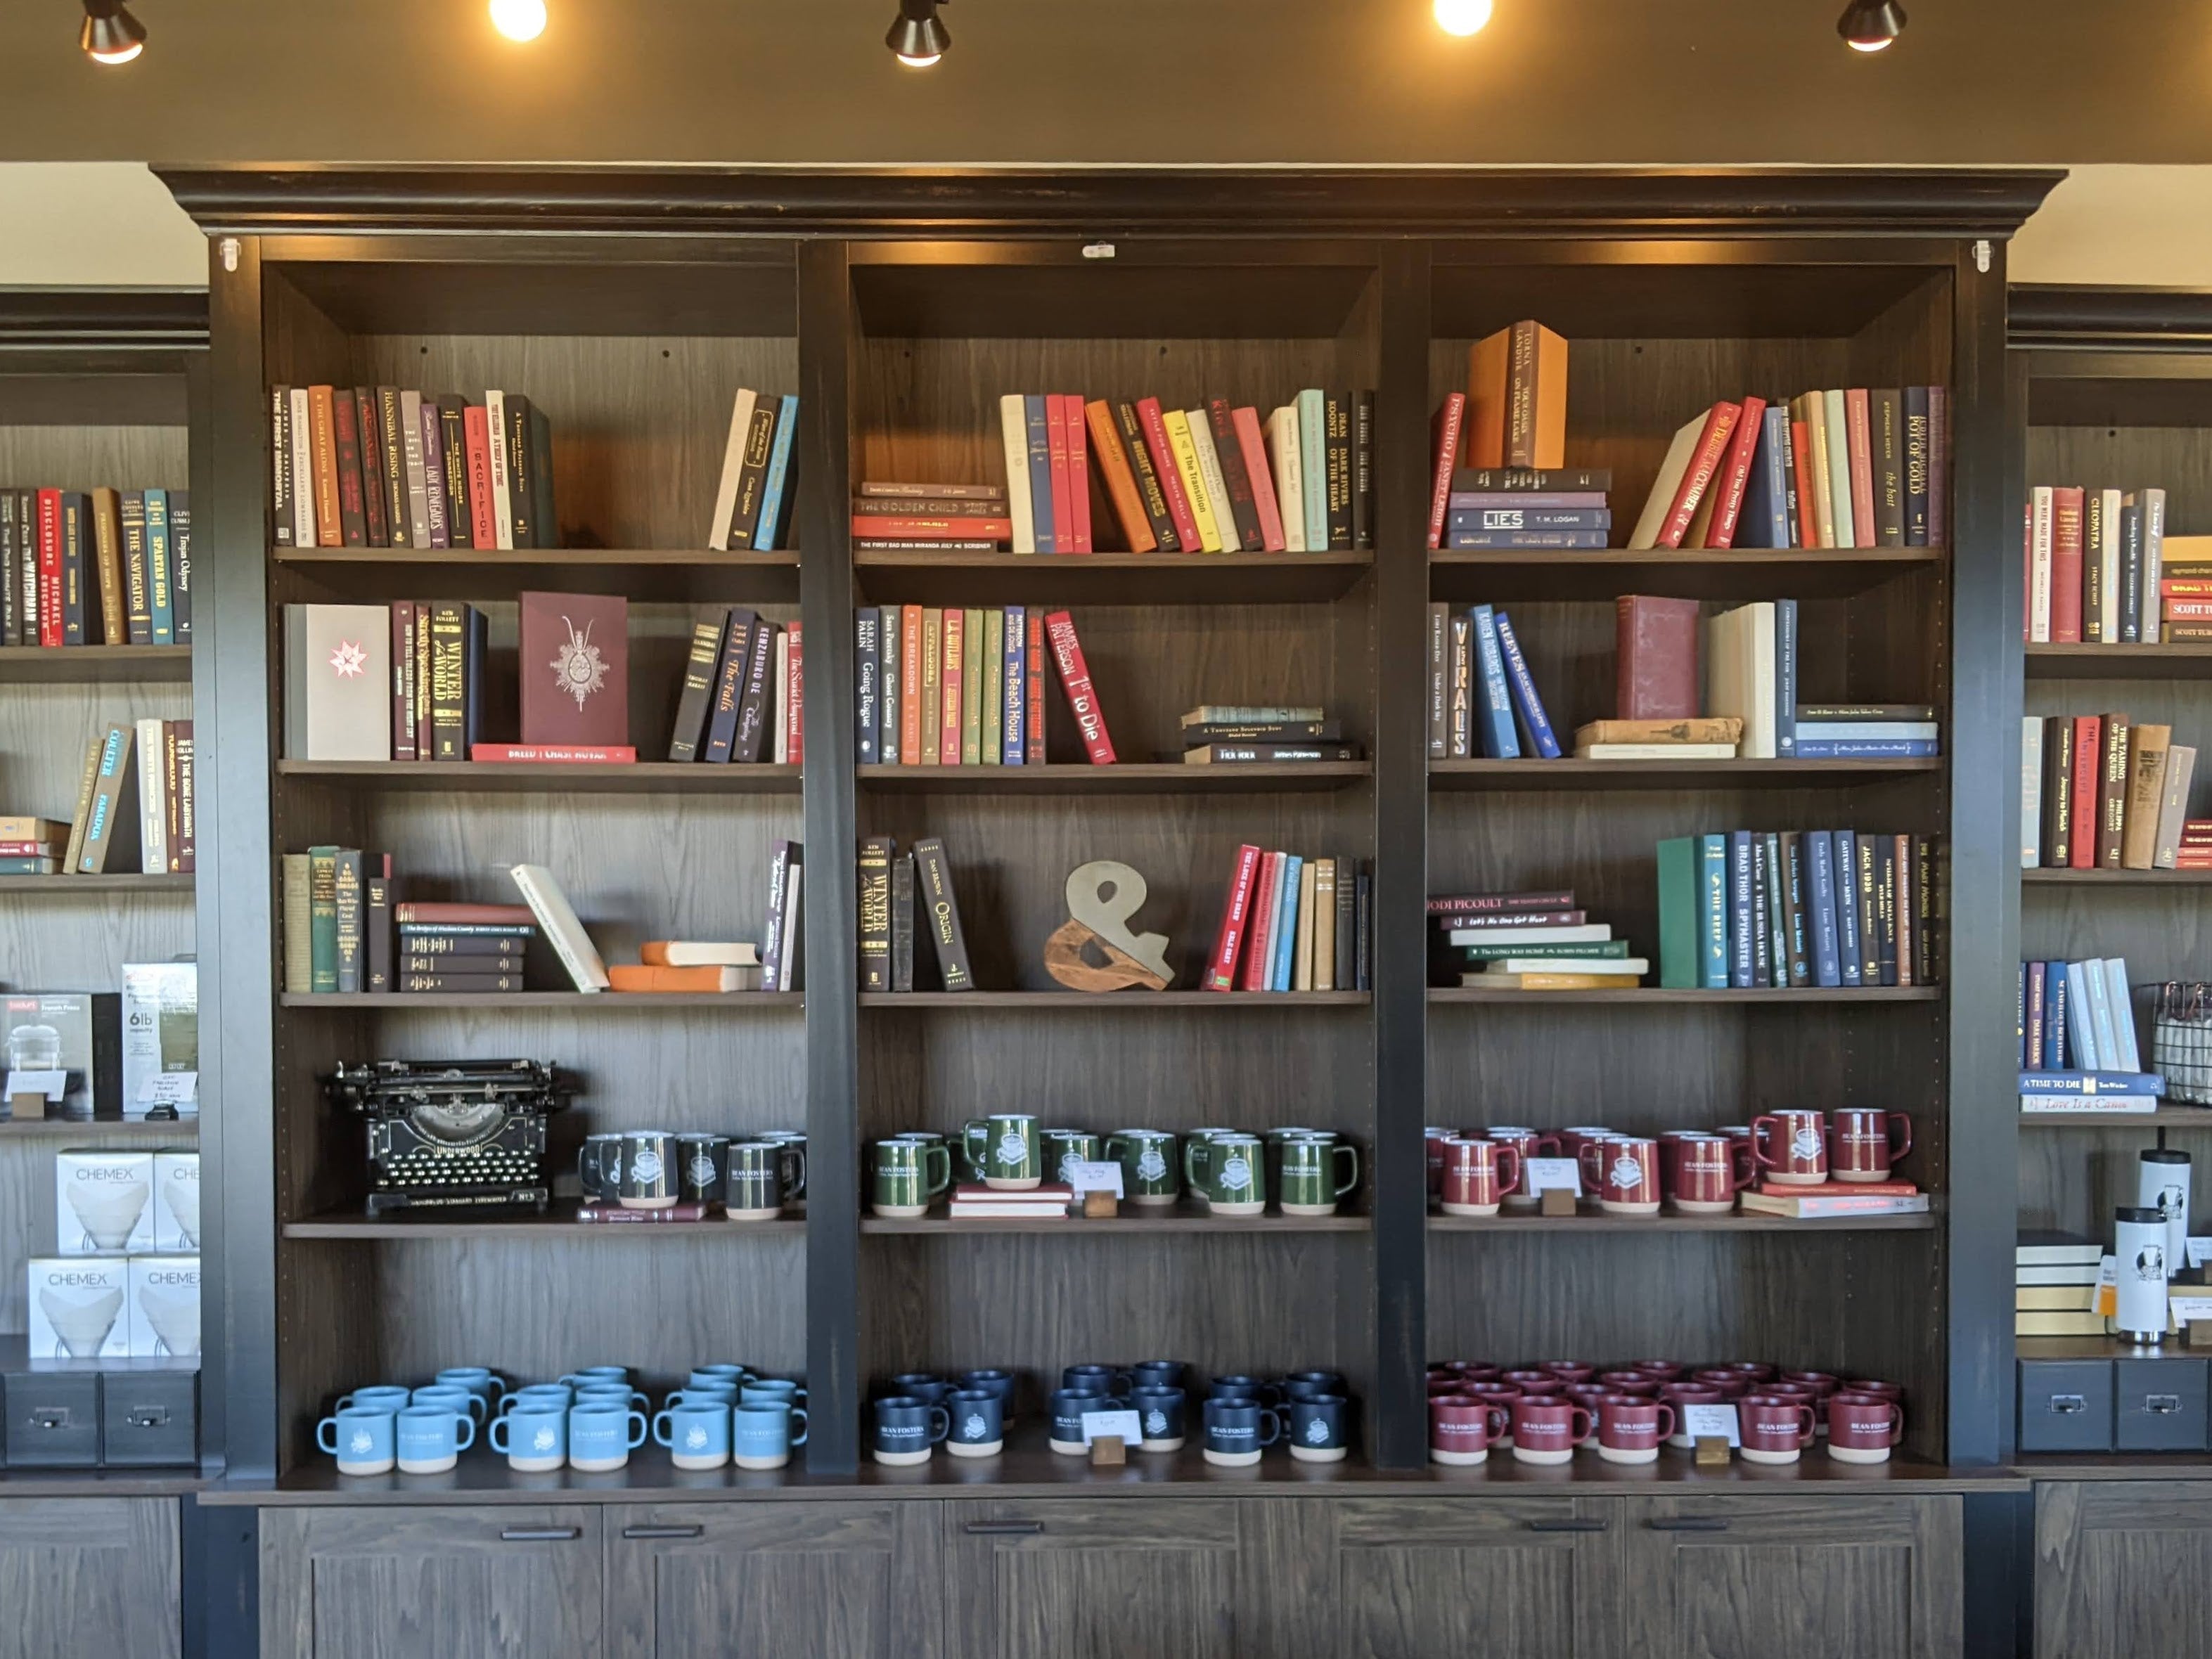 Shelves of books and mugs and trinkets.